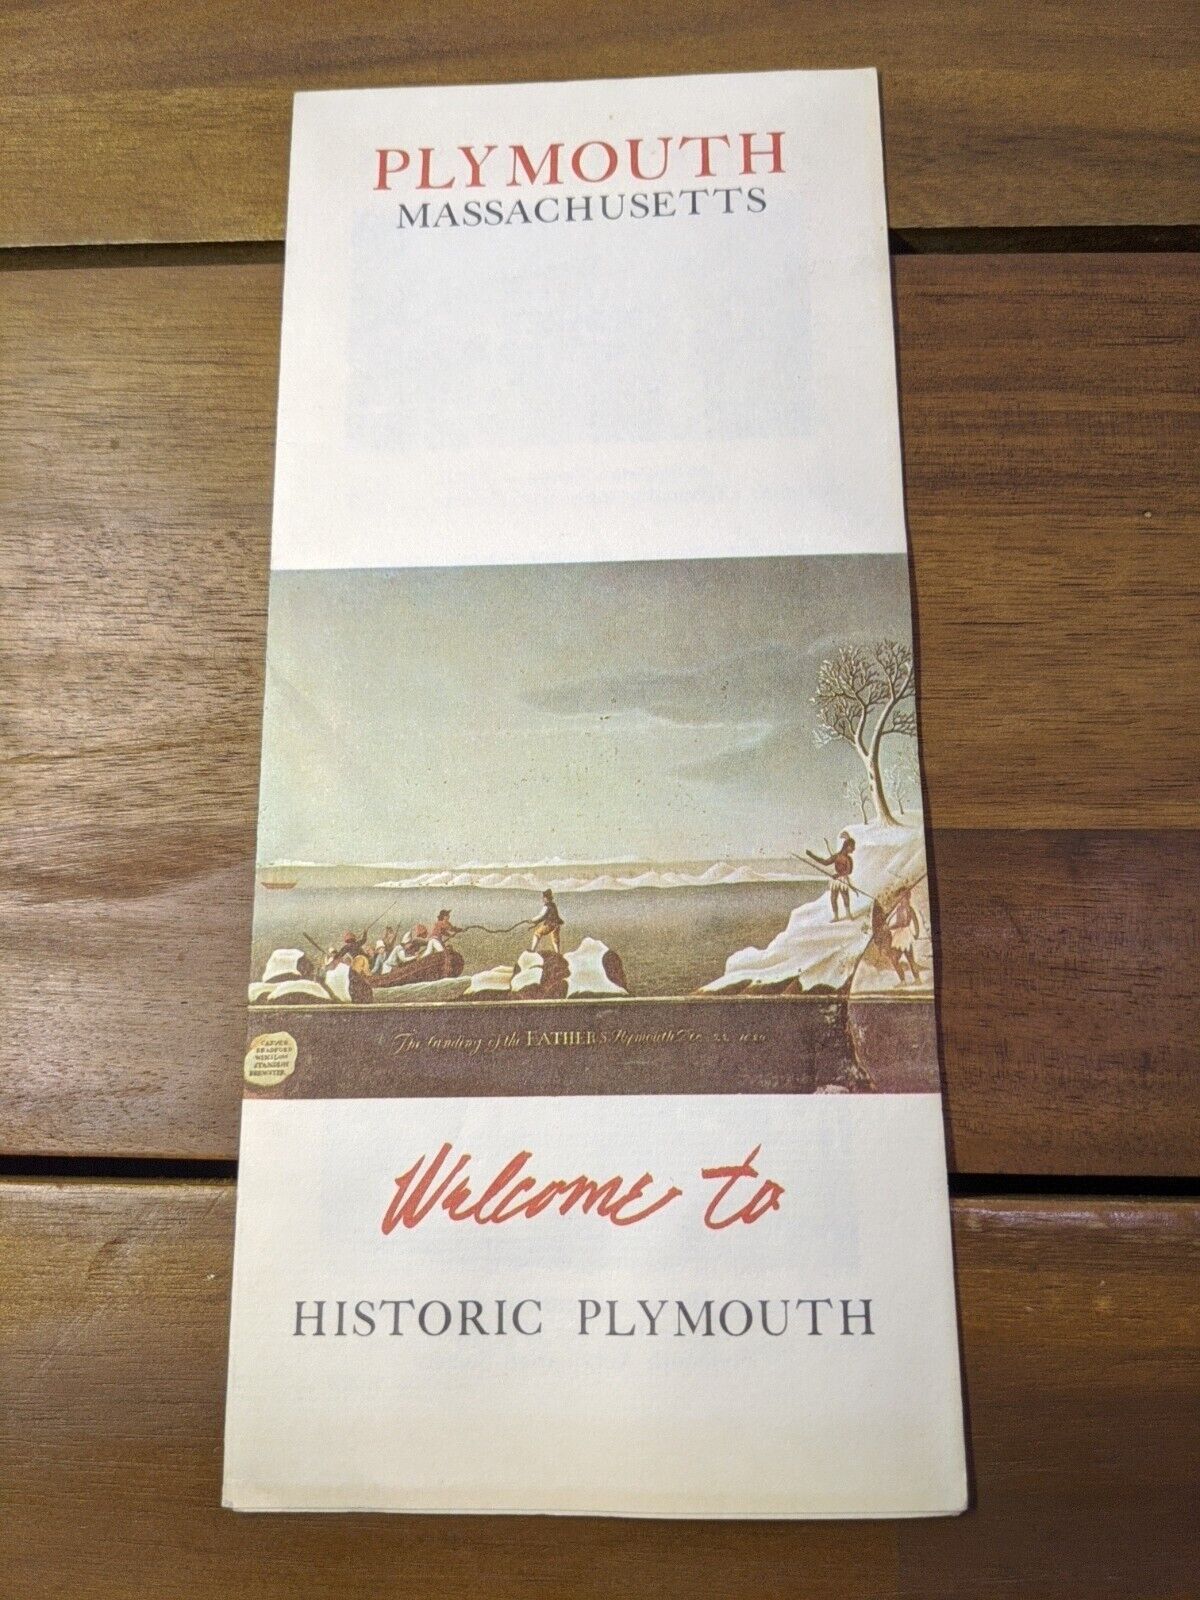 Plymouth Massachusetts Welcome To Historic Plymouth Brochure Pamphlet Booklet